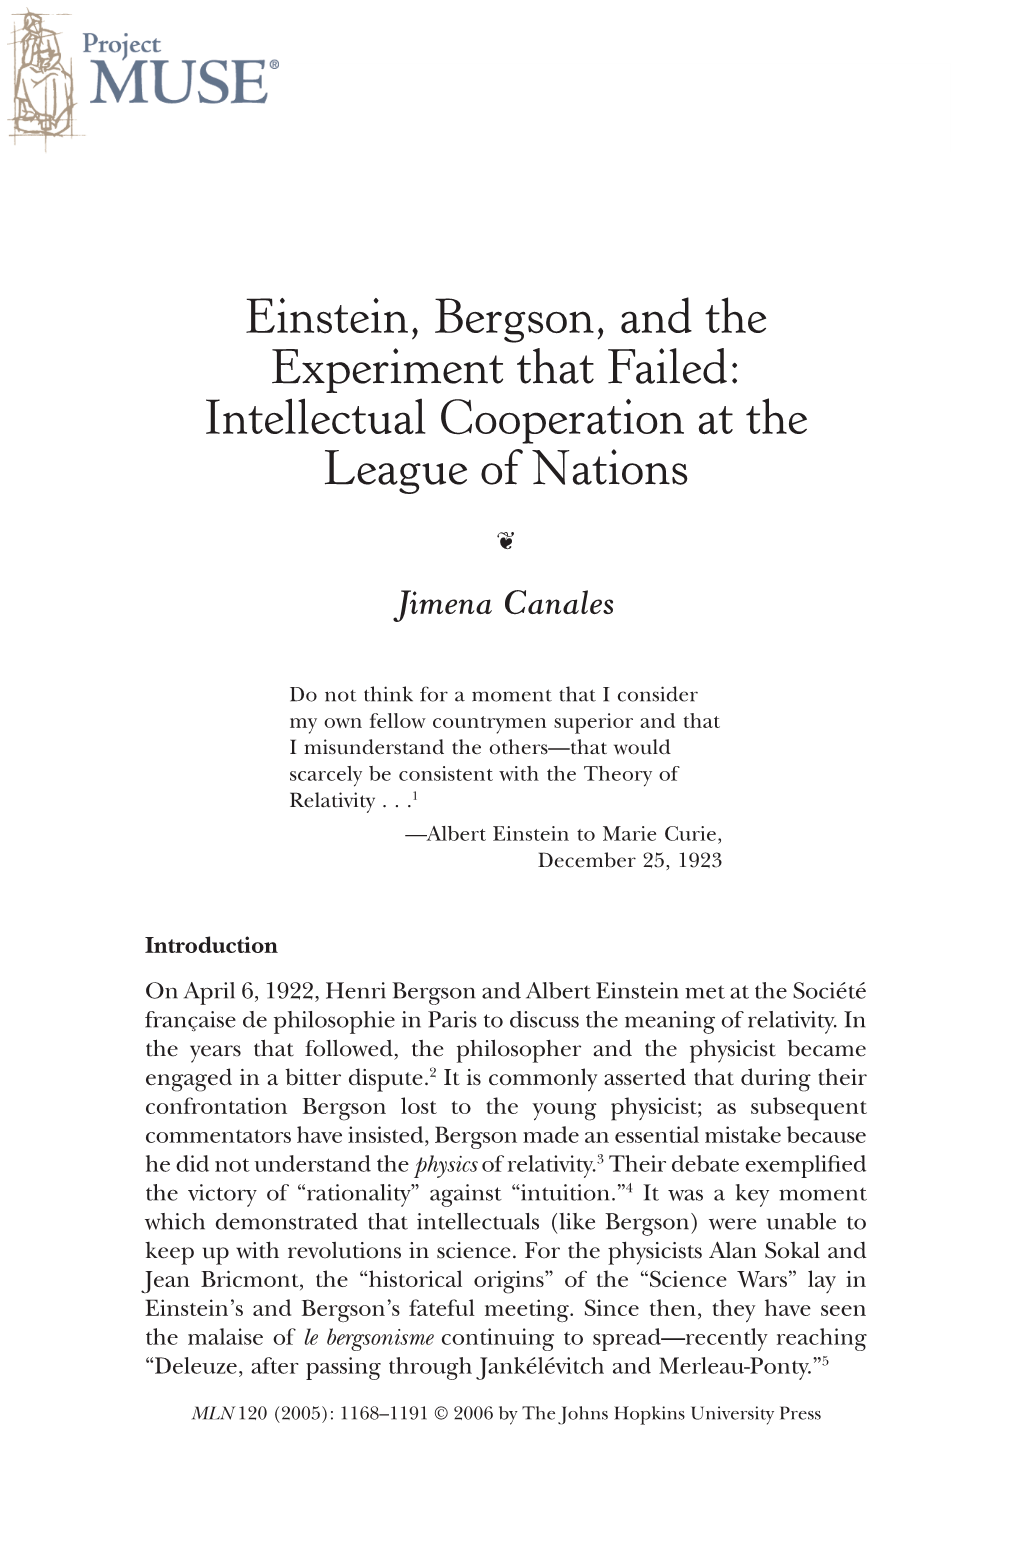 Einstein, Bergson, and the Experiment That Failed: Intellectual Cooperation at the League of Nations